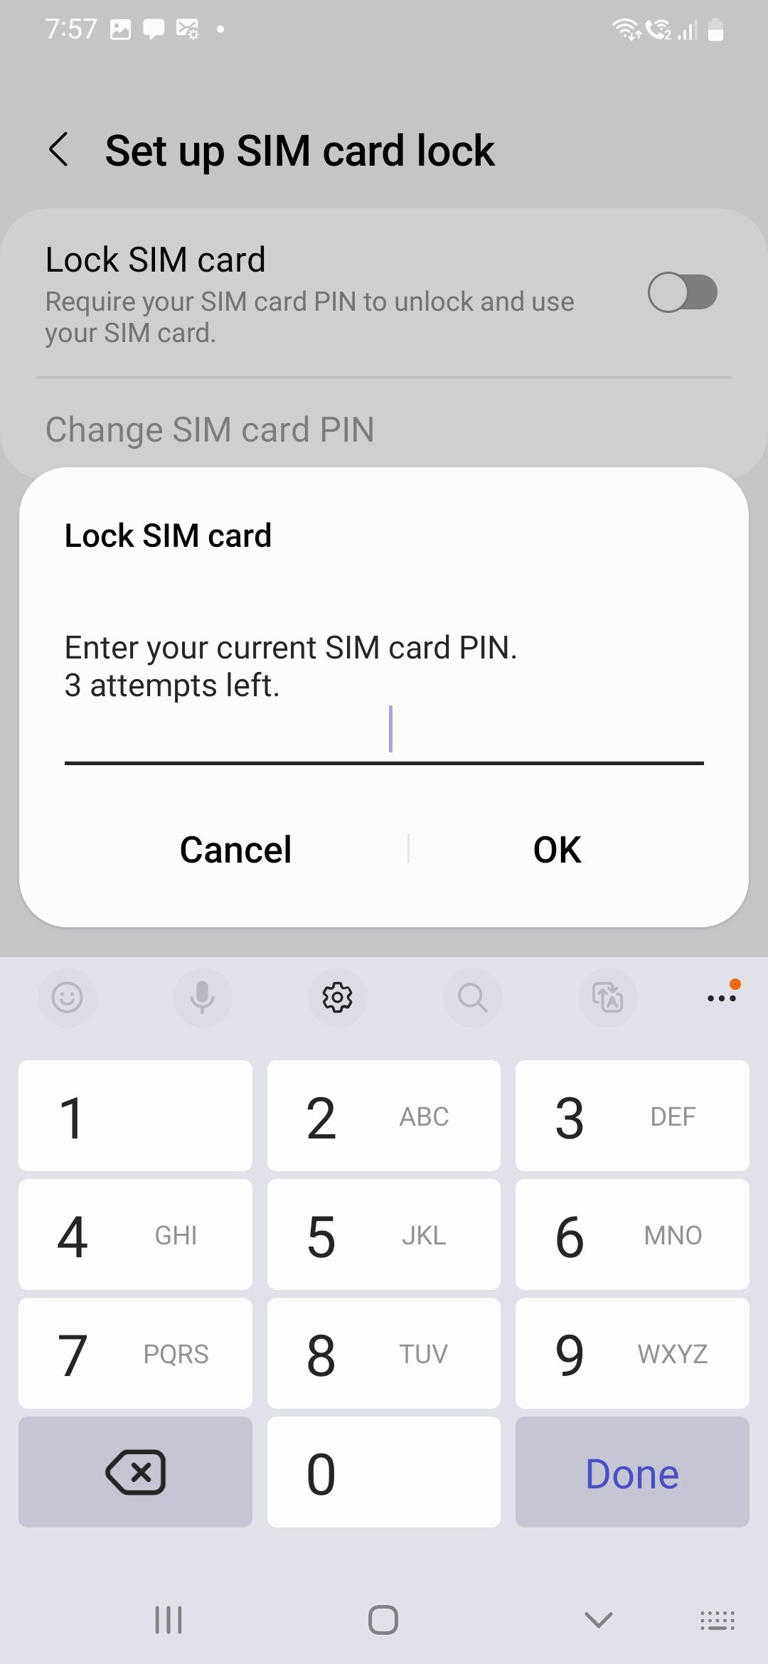 The Lock SIM card dialog box prompting you to enter your current SIM PIN on a Samsung phone